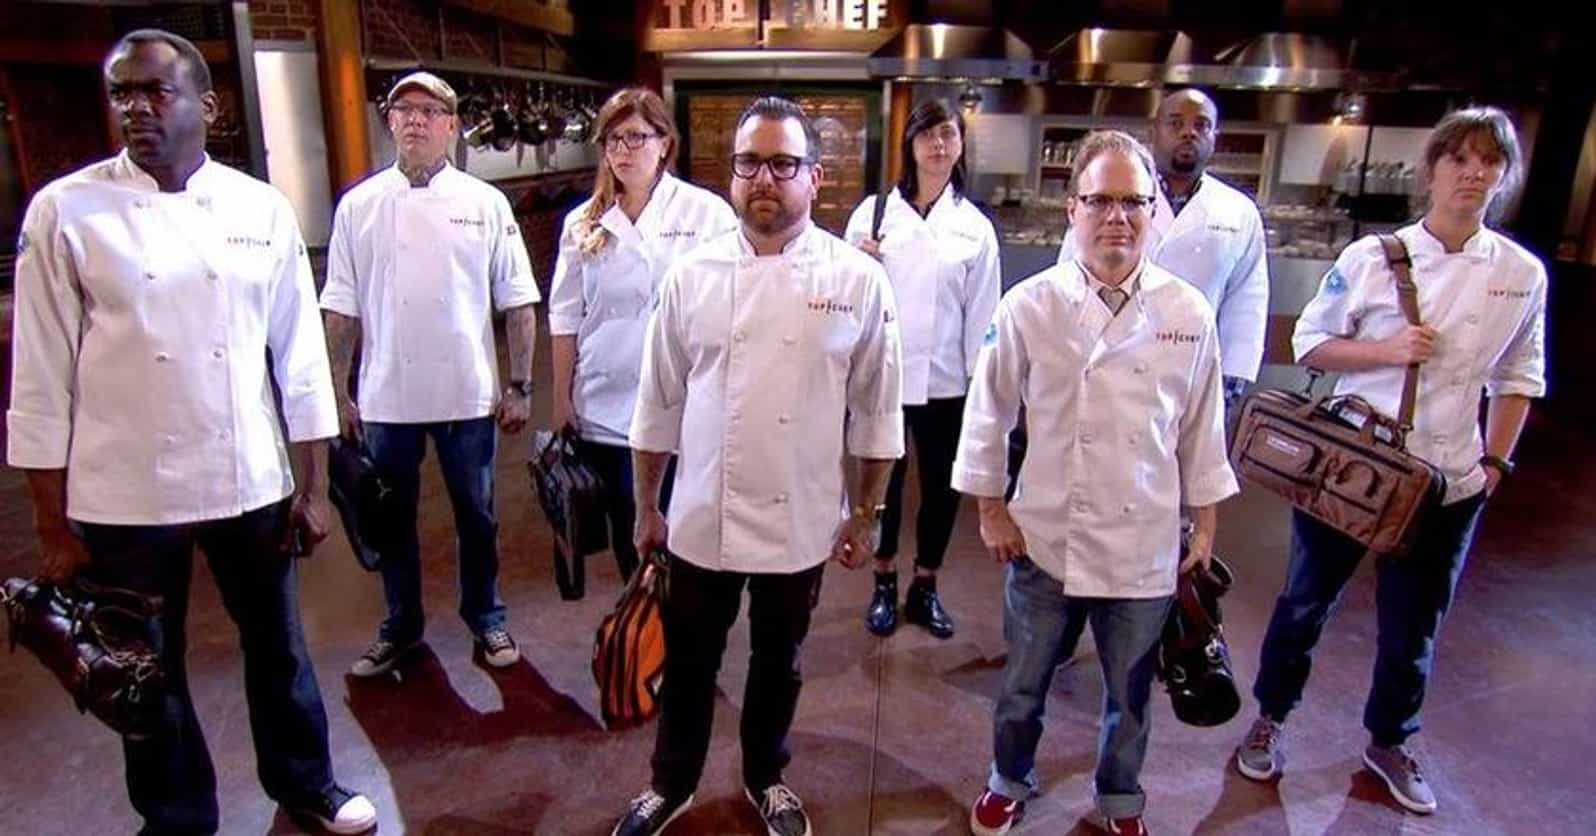 The Most Watchable Cooking Competition Shows